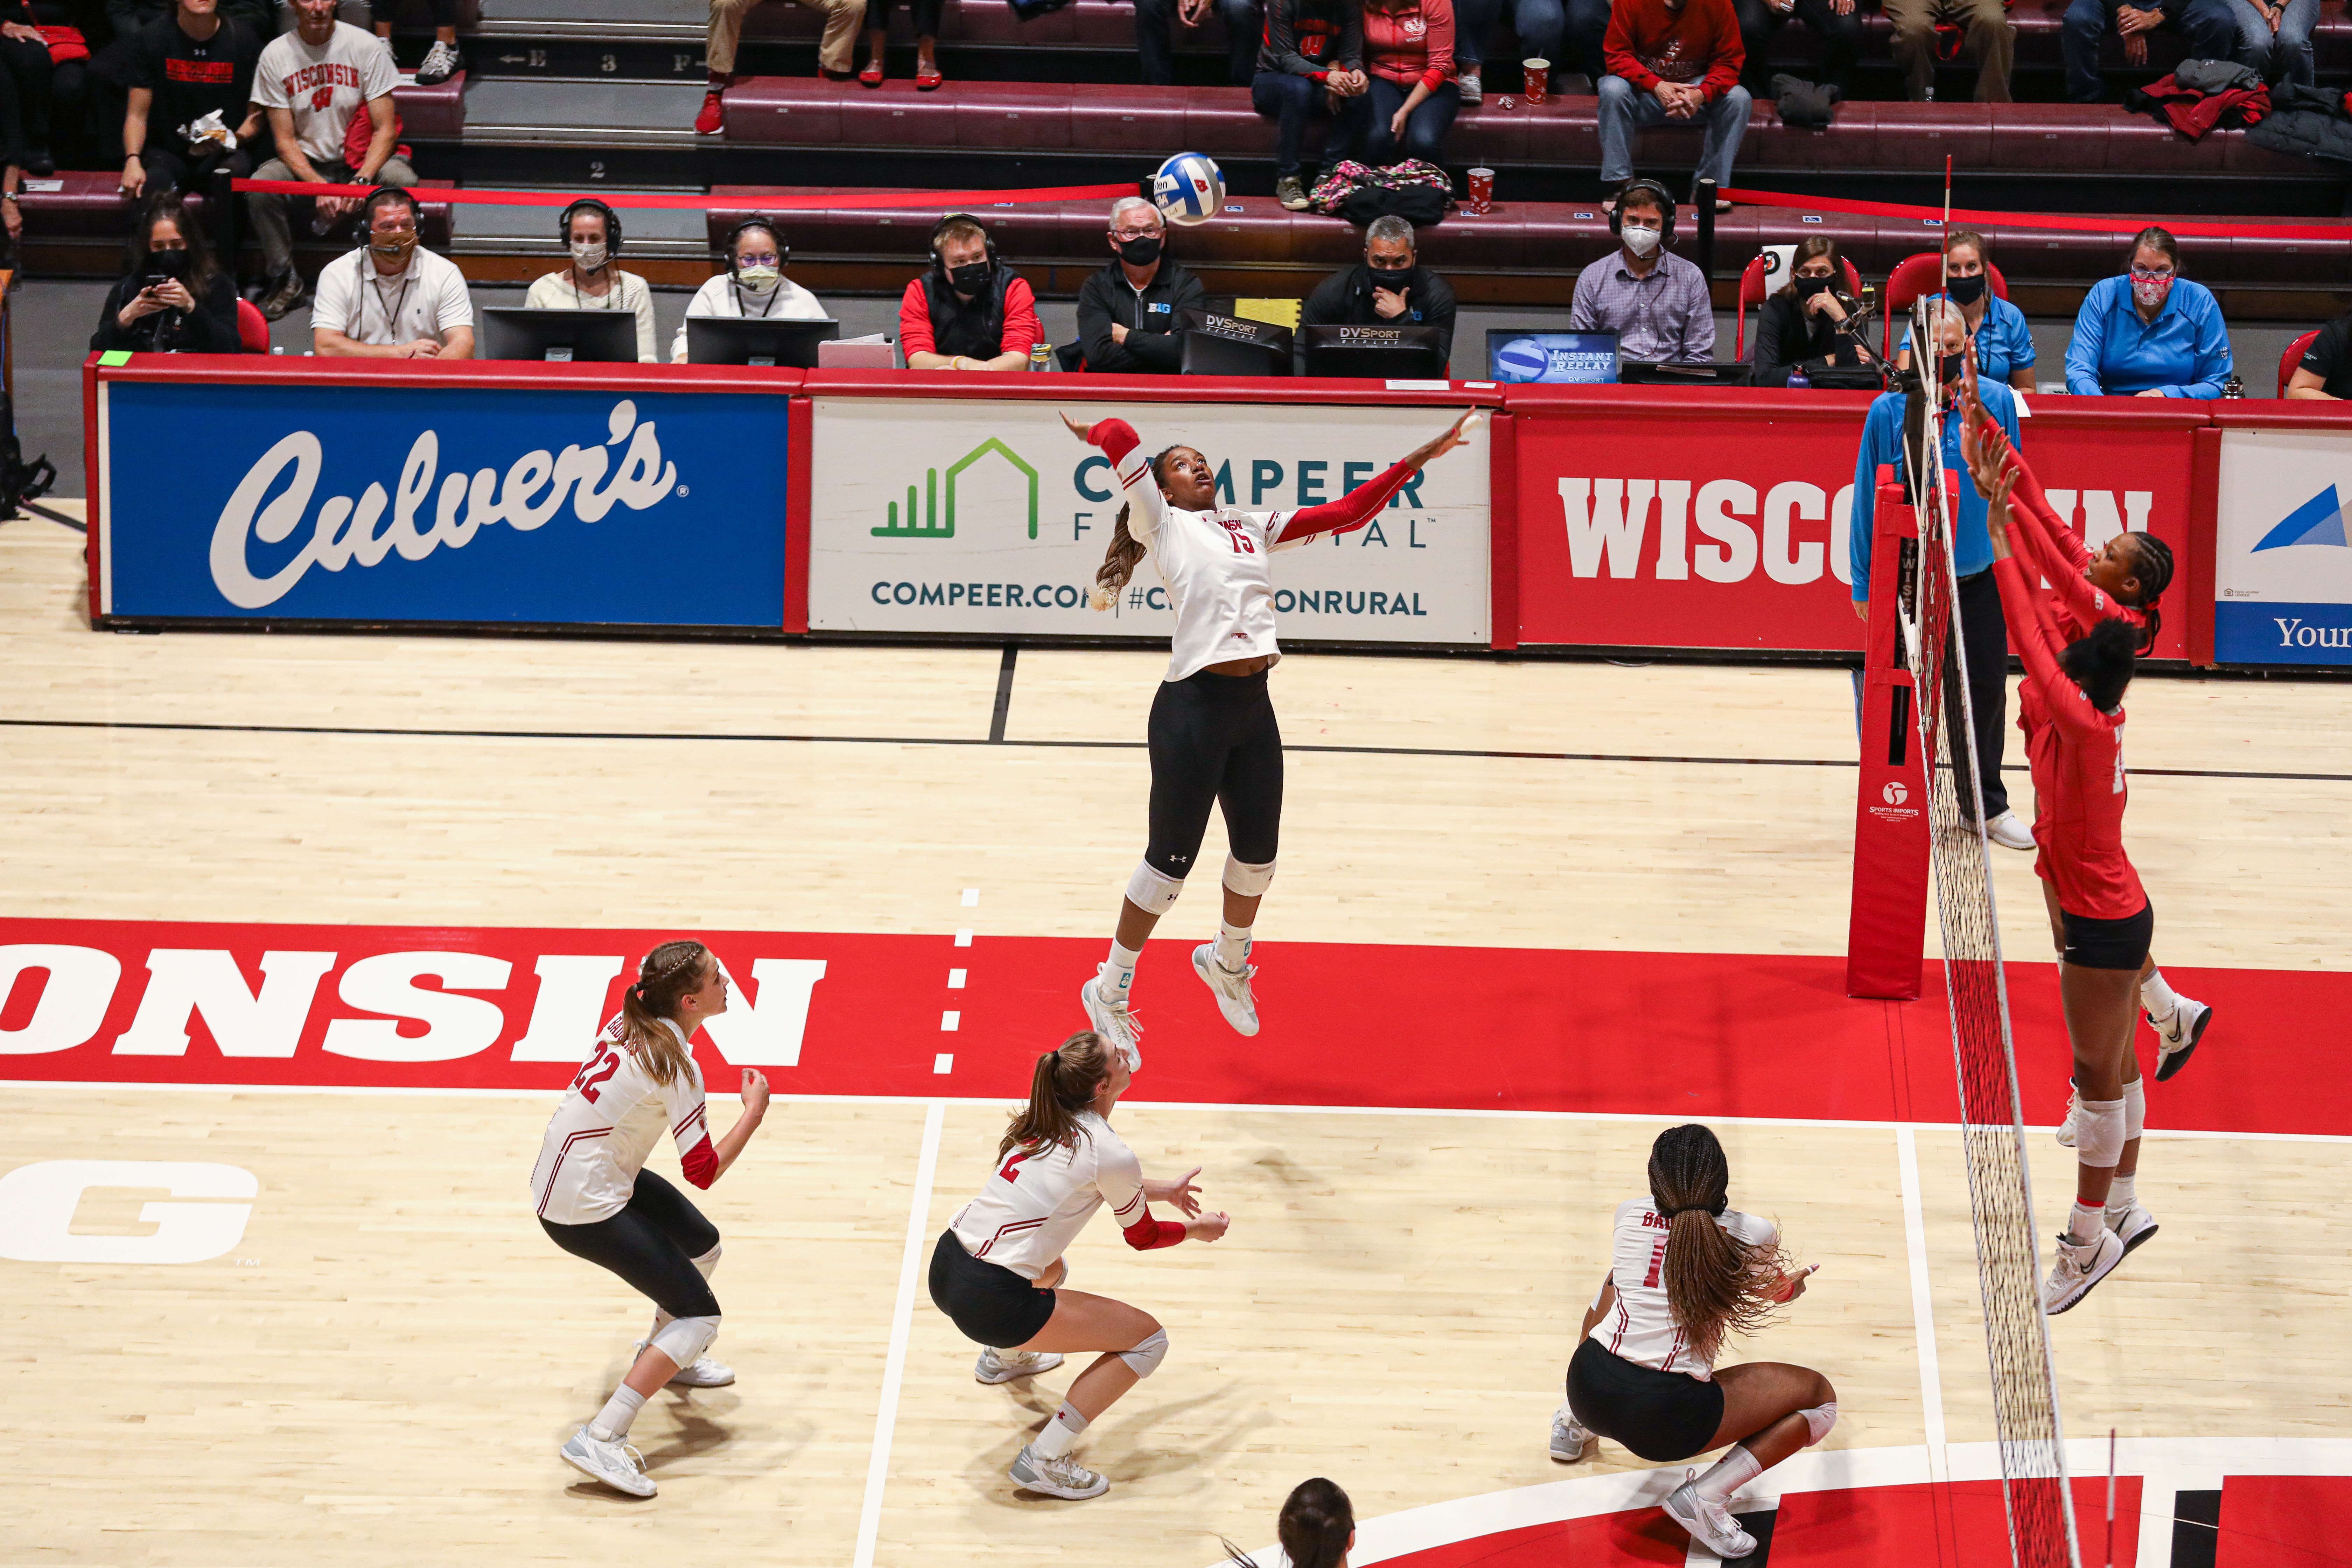 Watch reigning NCAA champions Wisconsin live on VBTV volleyballworld